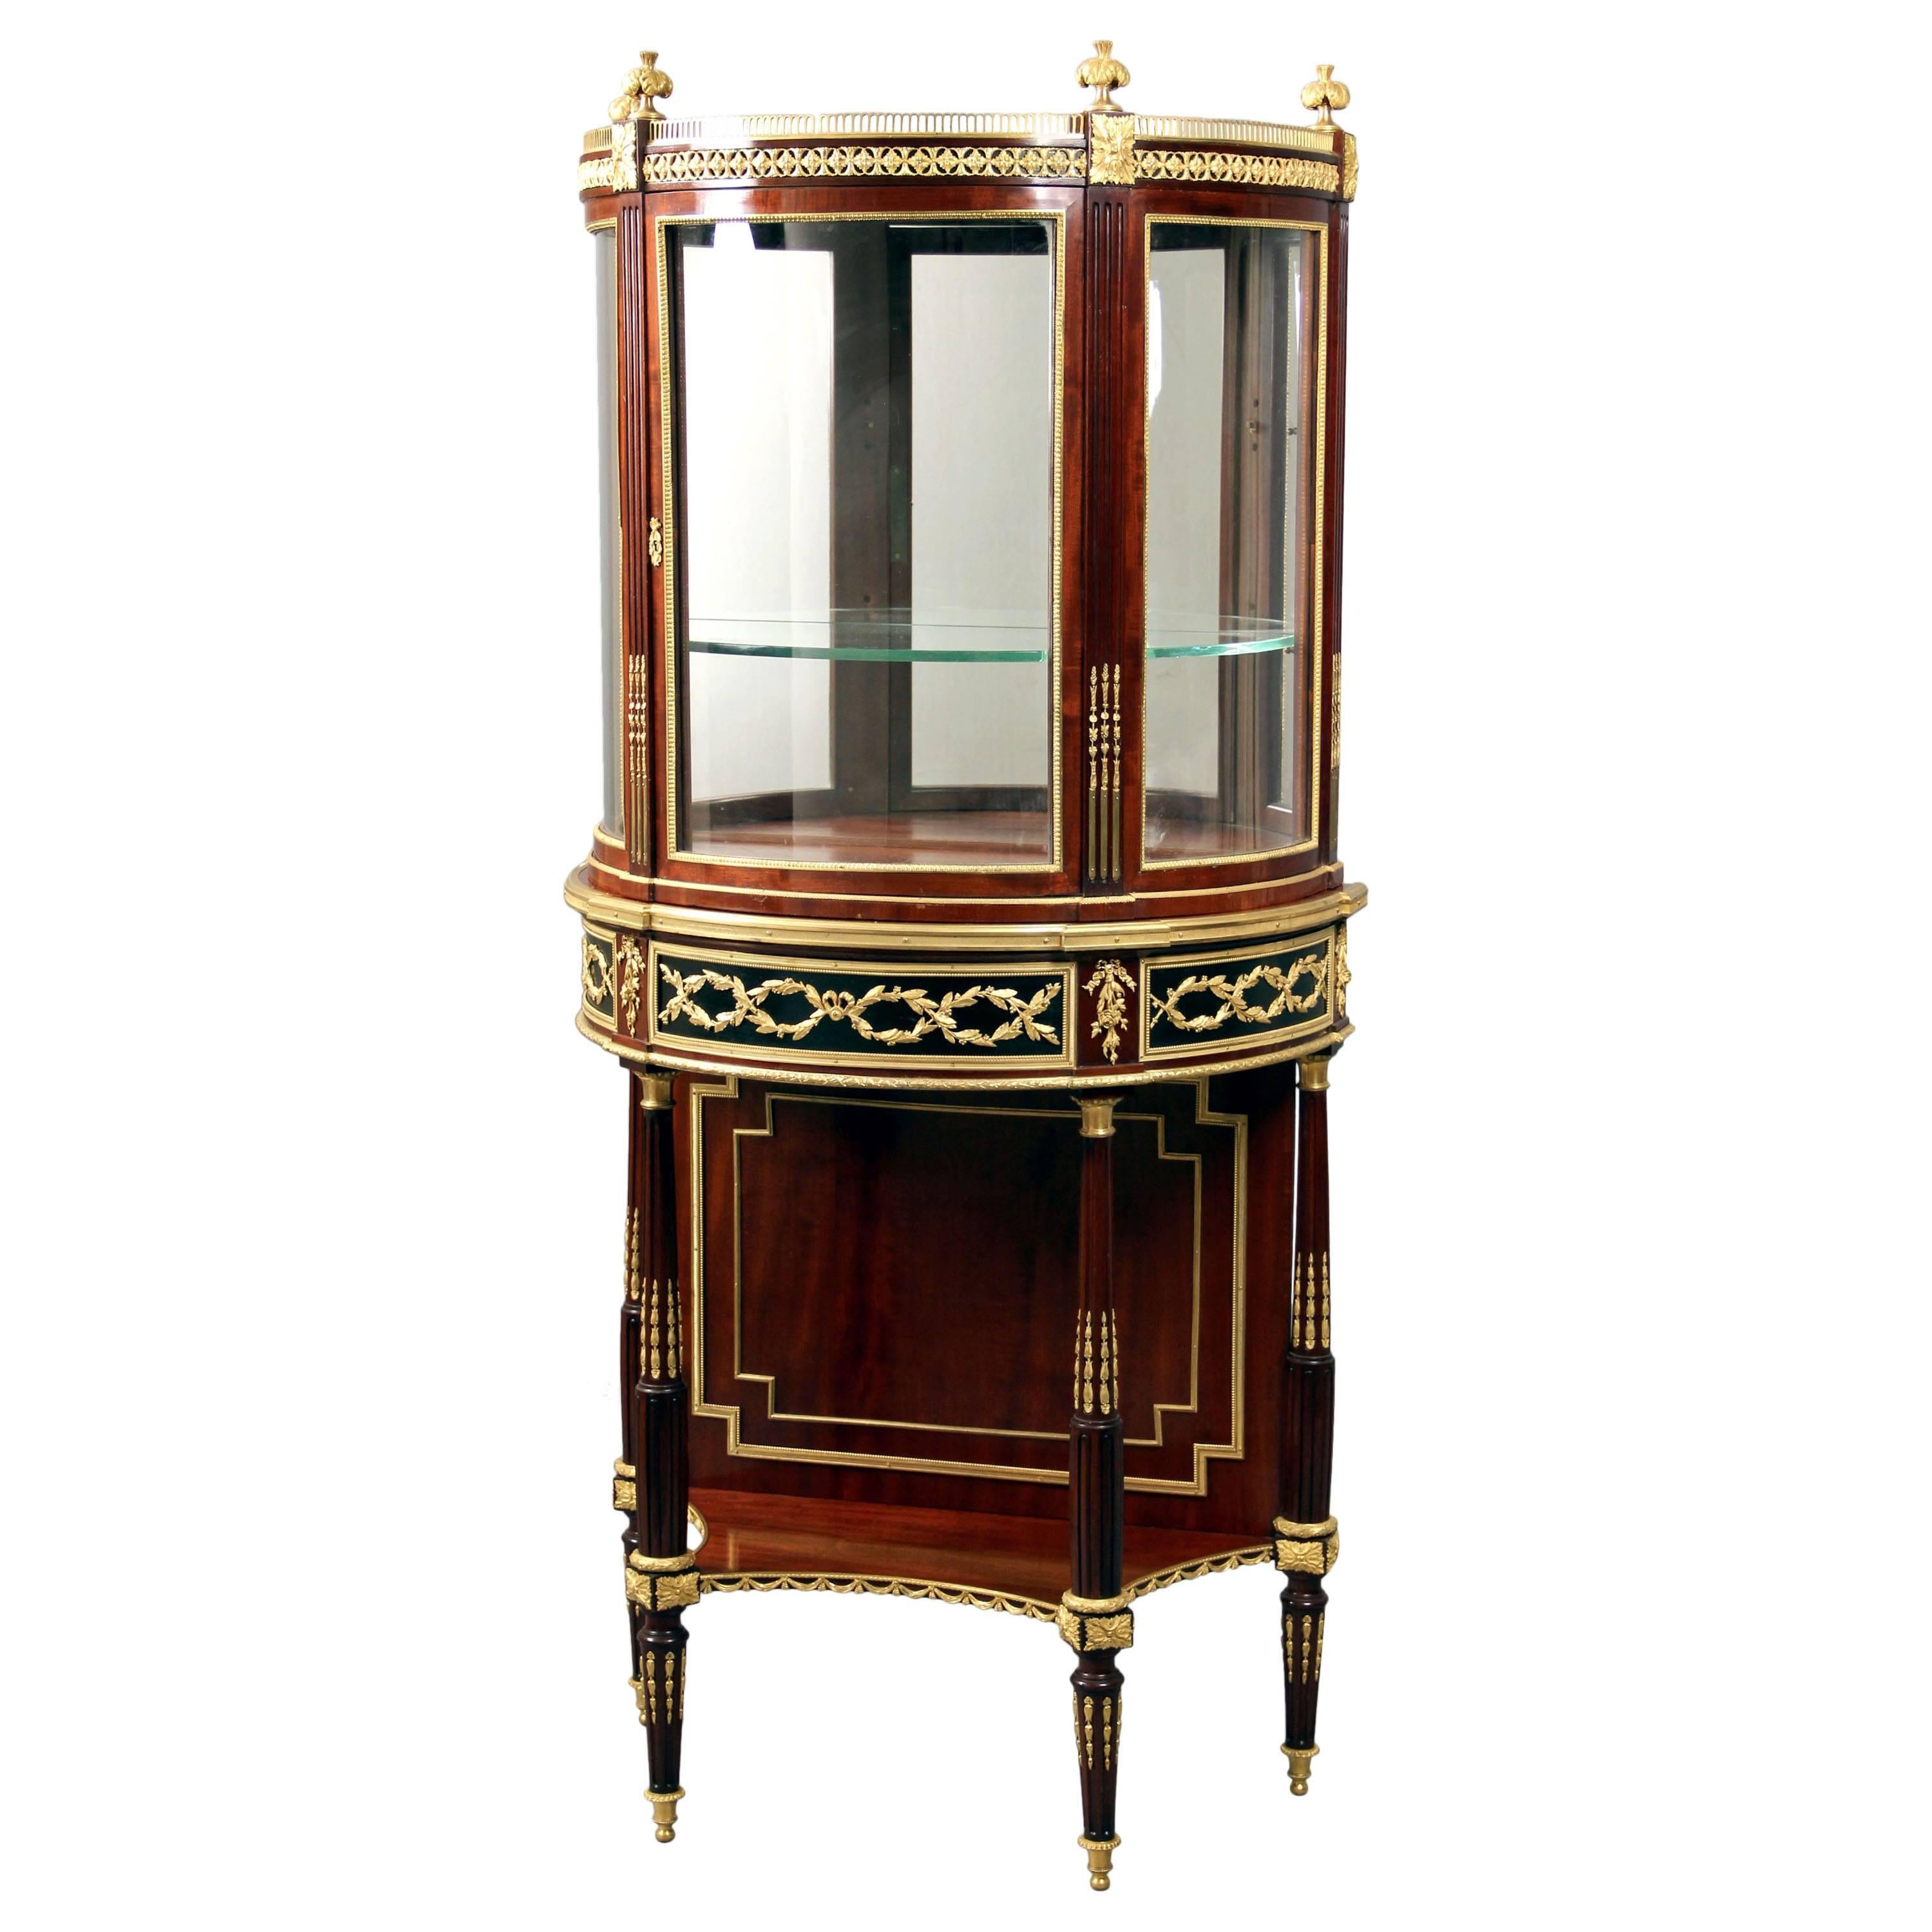 Late 19th Century Gilt Bronze-Mounted Vitrine by Victor Raulin For Sale